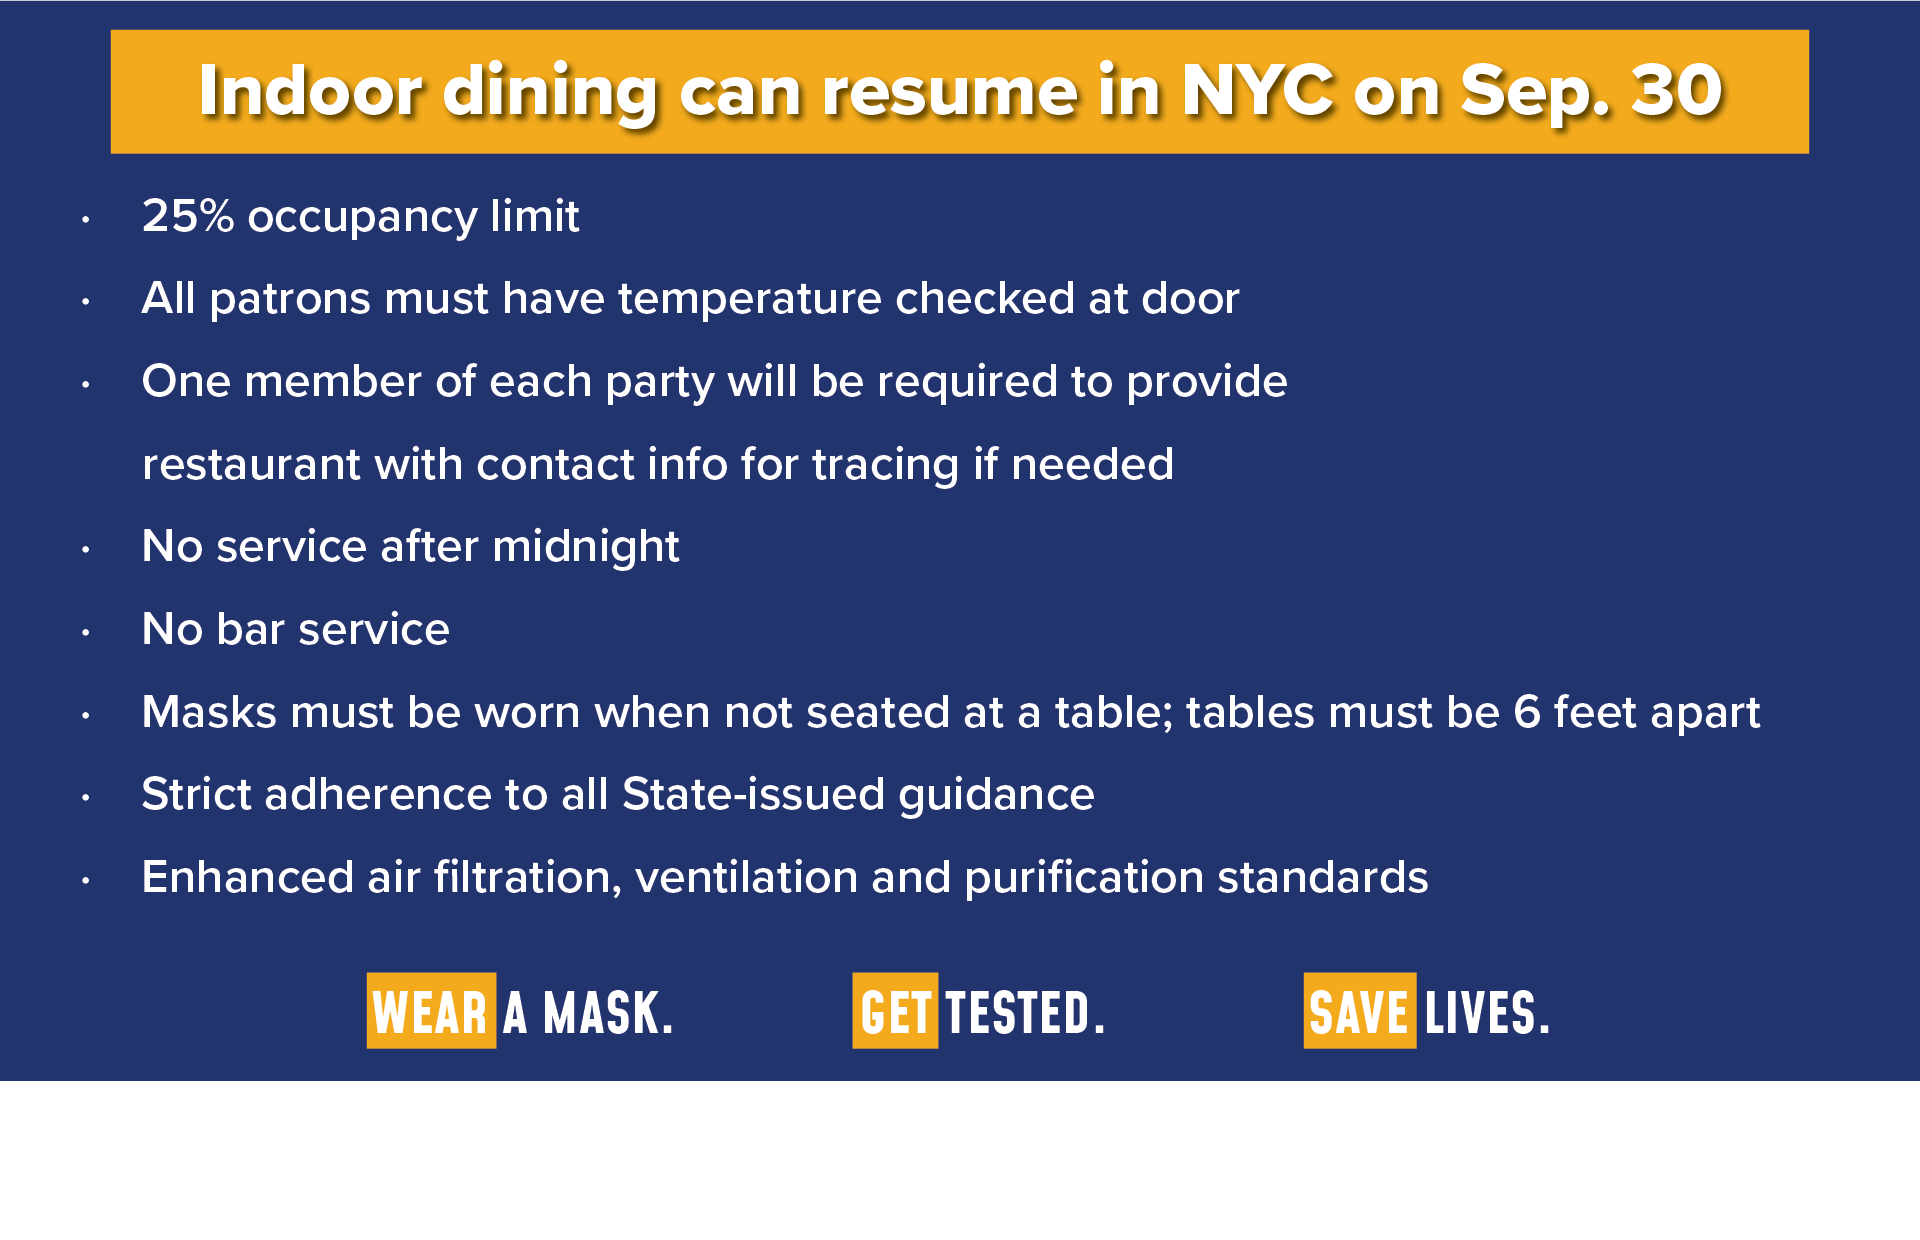 Indoor Dining Returns at 25% on September 30th, Heavy Restrictions